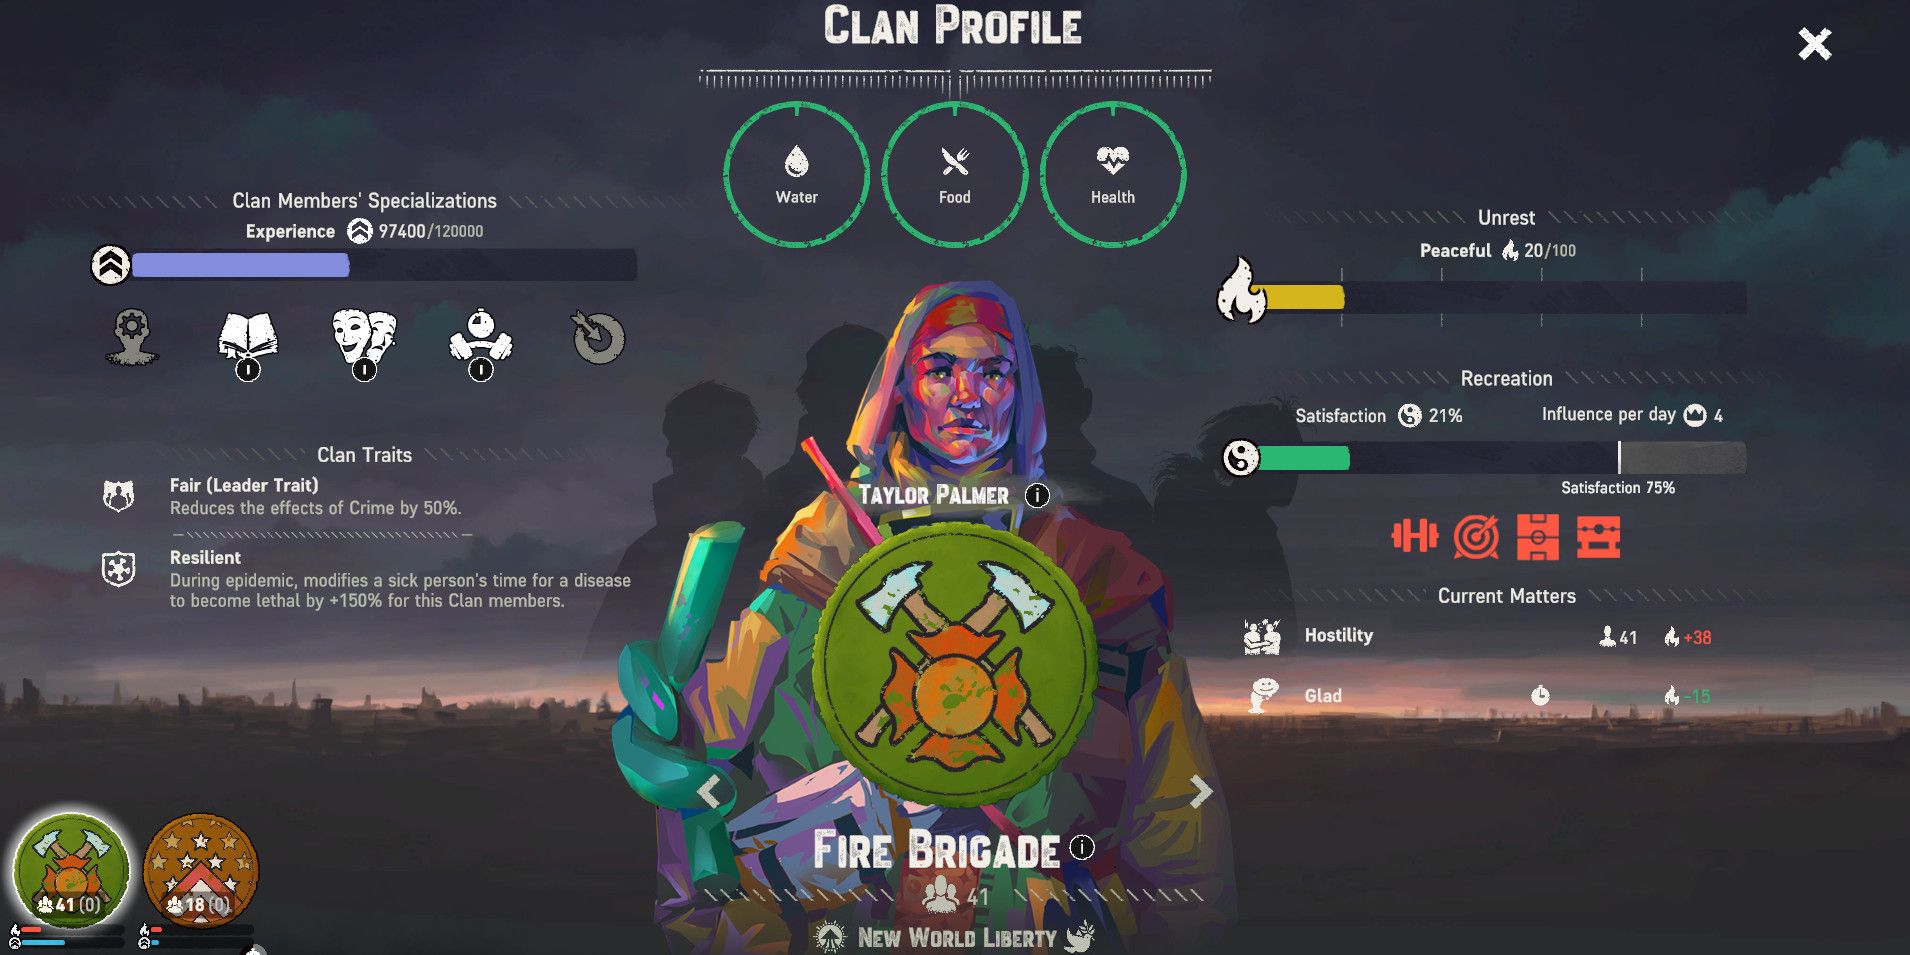 the clan screen in floodland